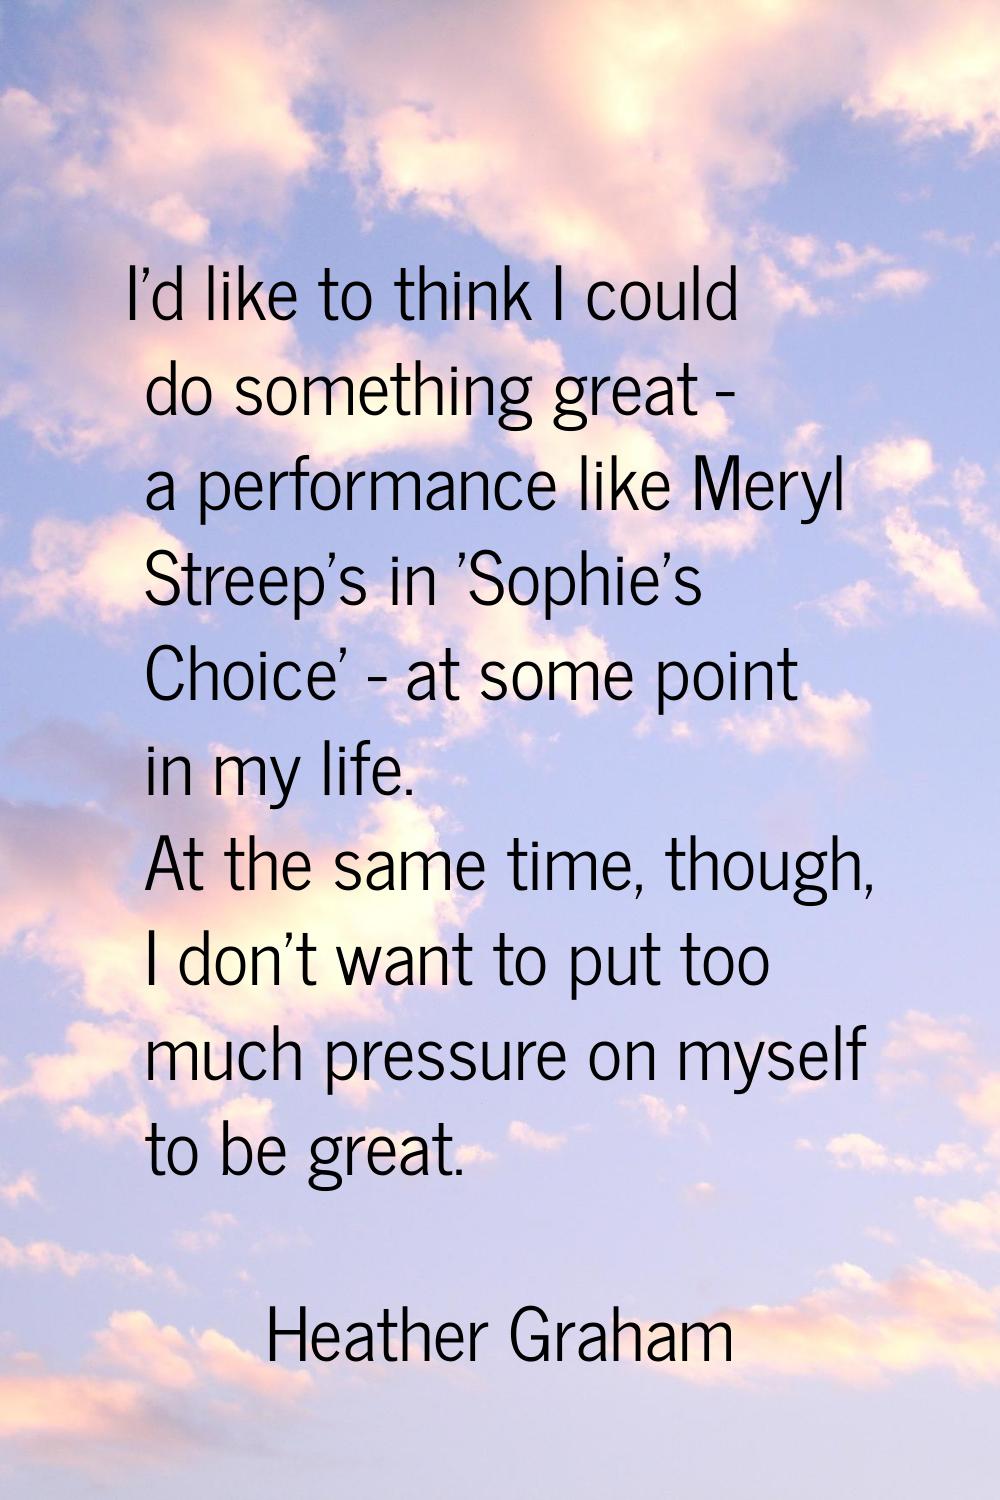 I'd like to think I could do something great - a performance like Meryl Streep's in 'Sophie's Choic